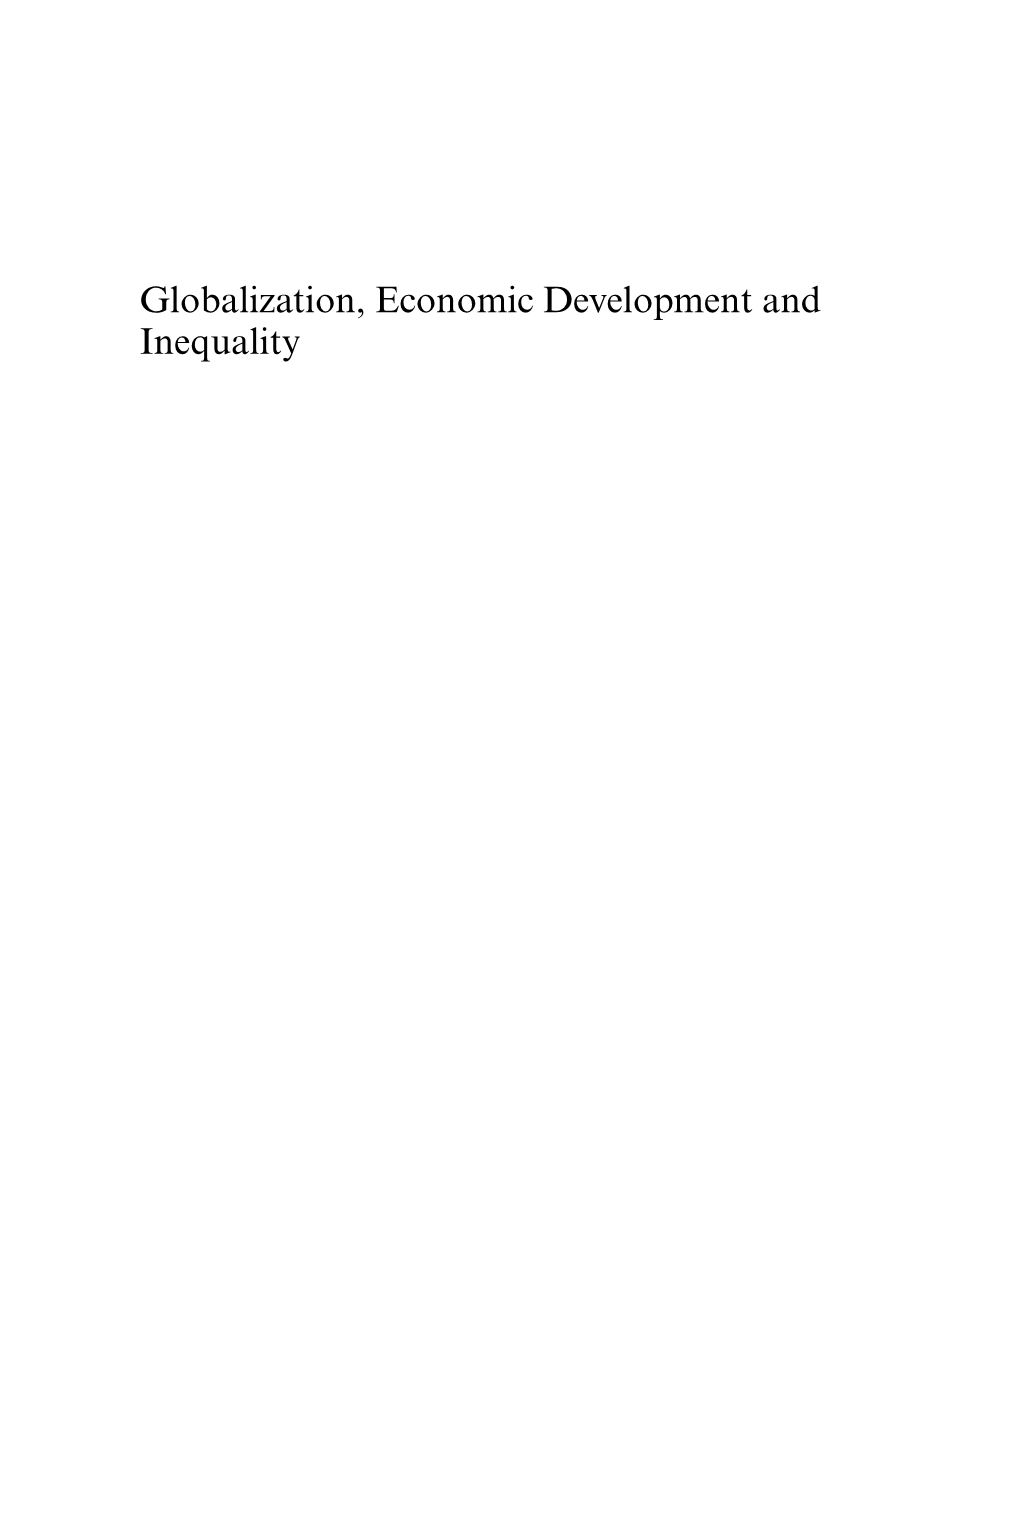 Globalization, Economic Development and Inequality NEW HORIZONS in INSTITUTIONAL and EVOLUTIONARY ECONOMICS